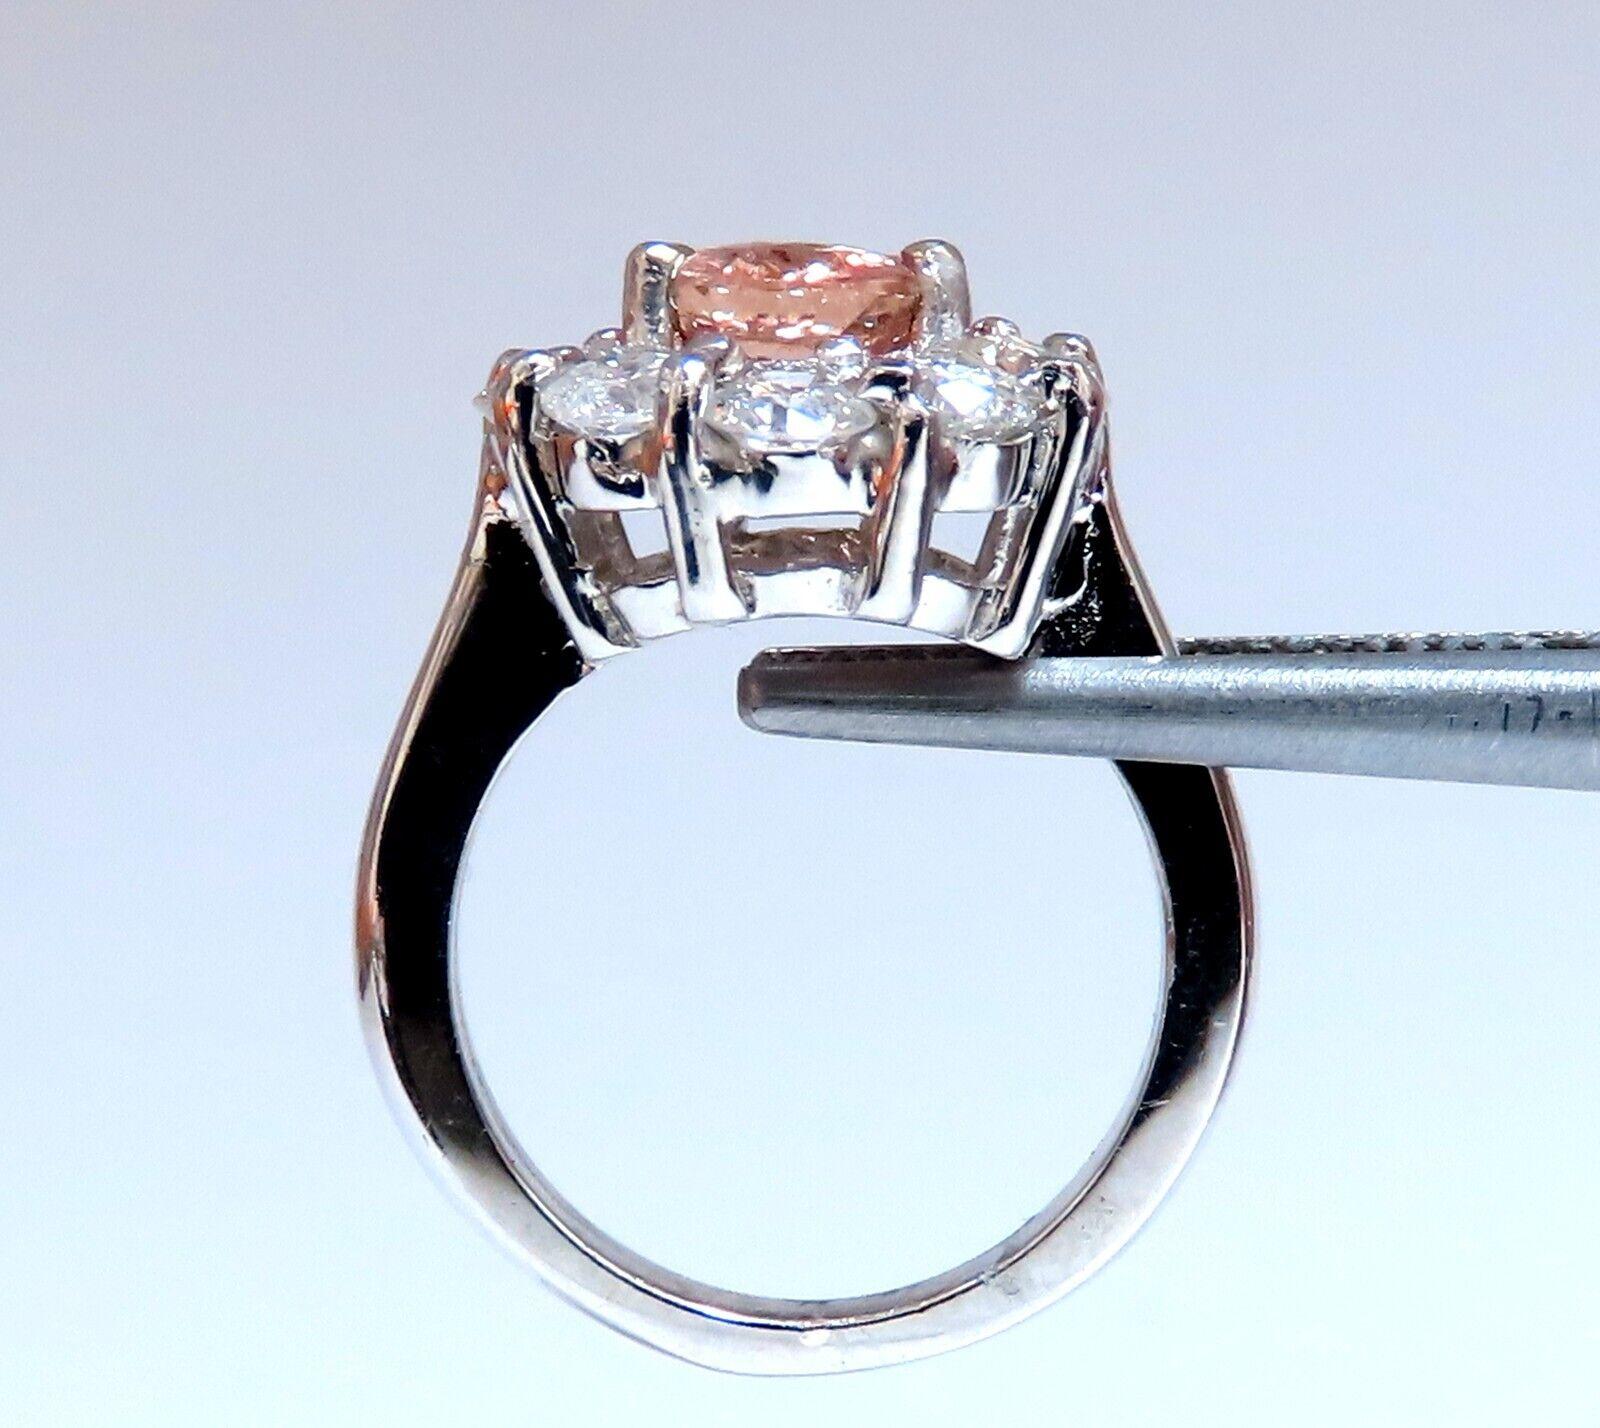 Women's or Men's GIA Certified 2.05 Carat Natural Padparadscha Pink Sapphire Diamond Ring Fine For Sale